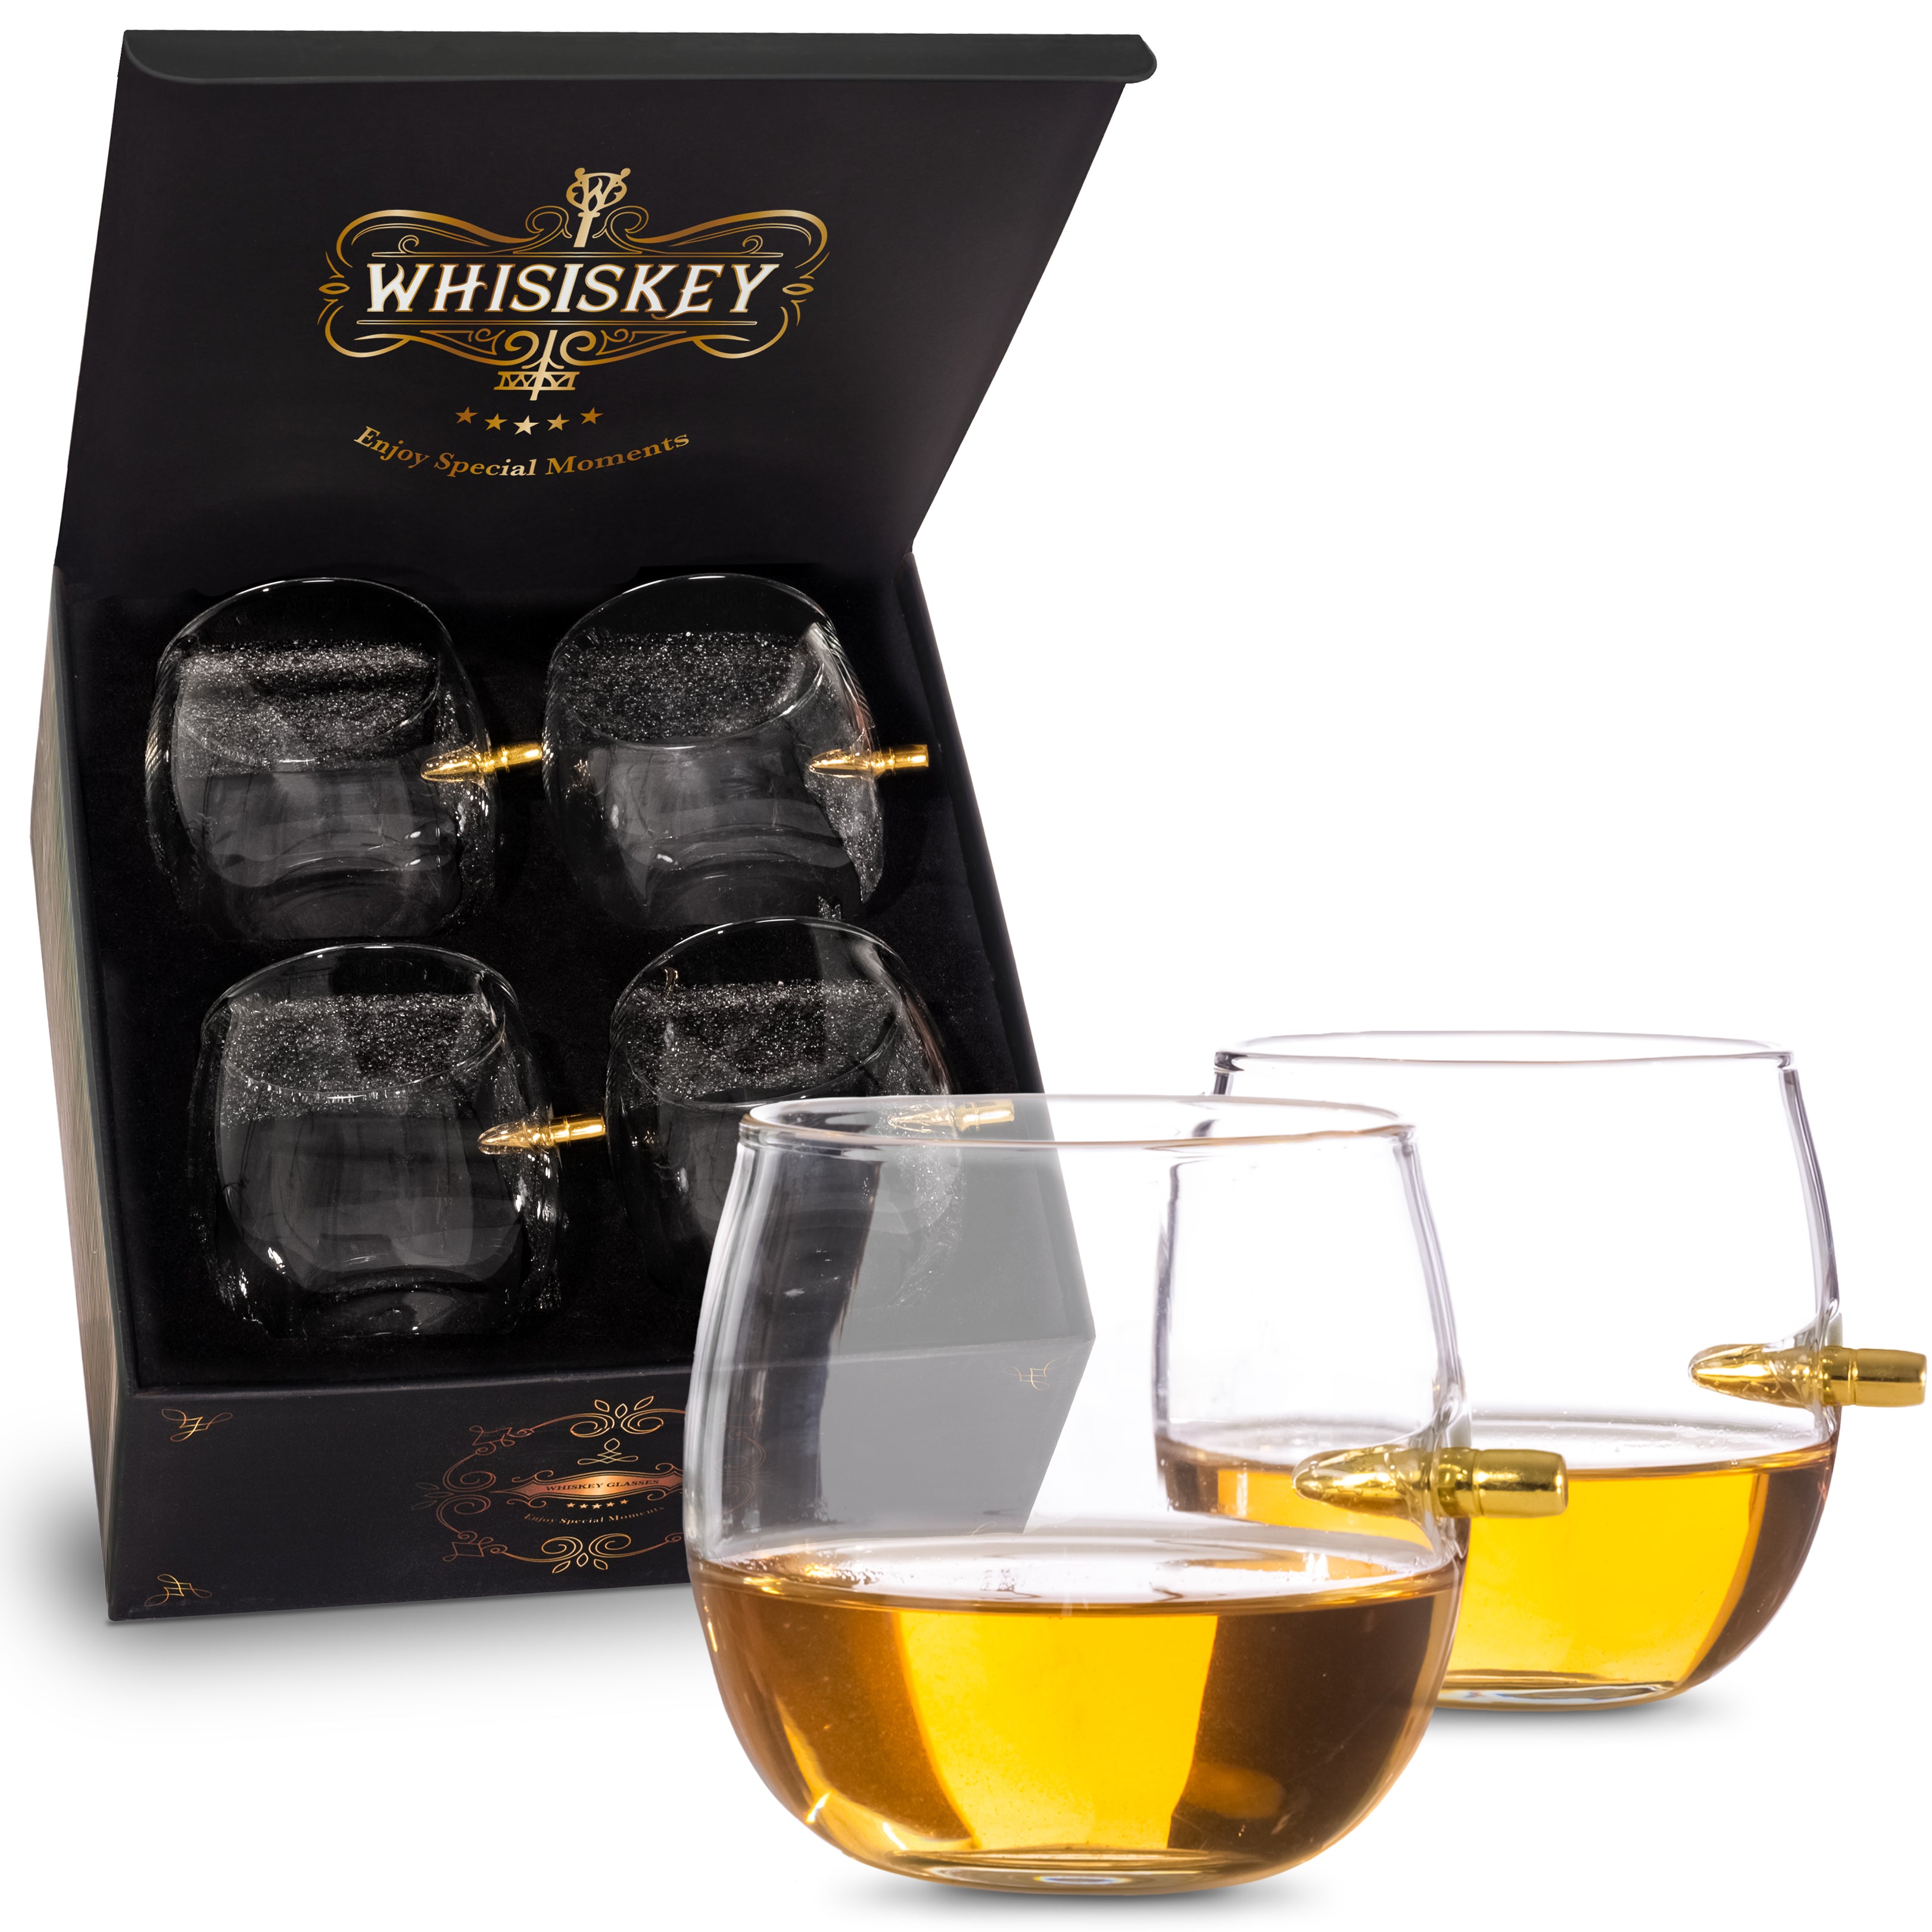 The Round Bullet Glasses - Whisky Verres